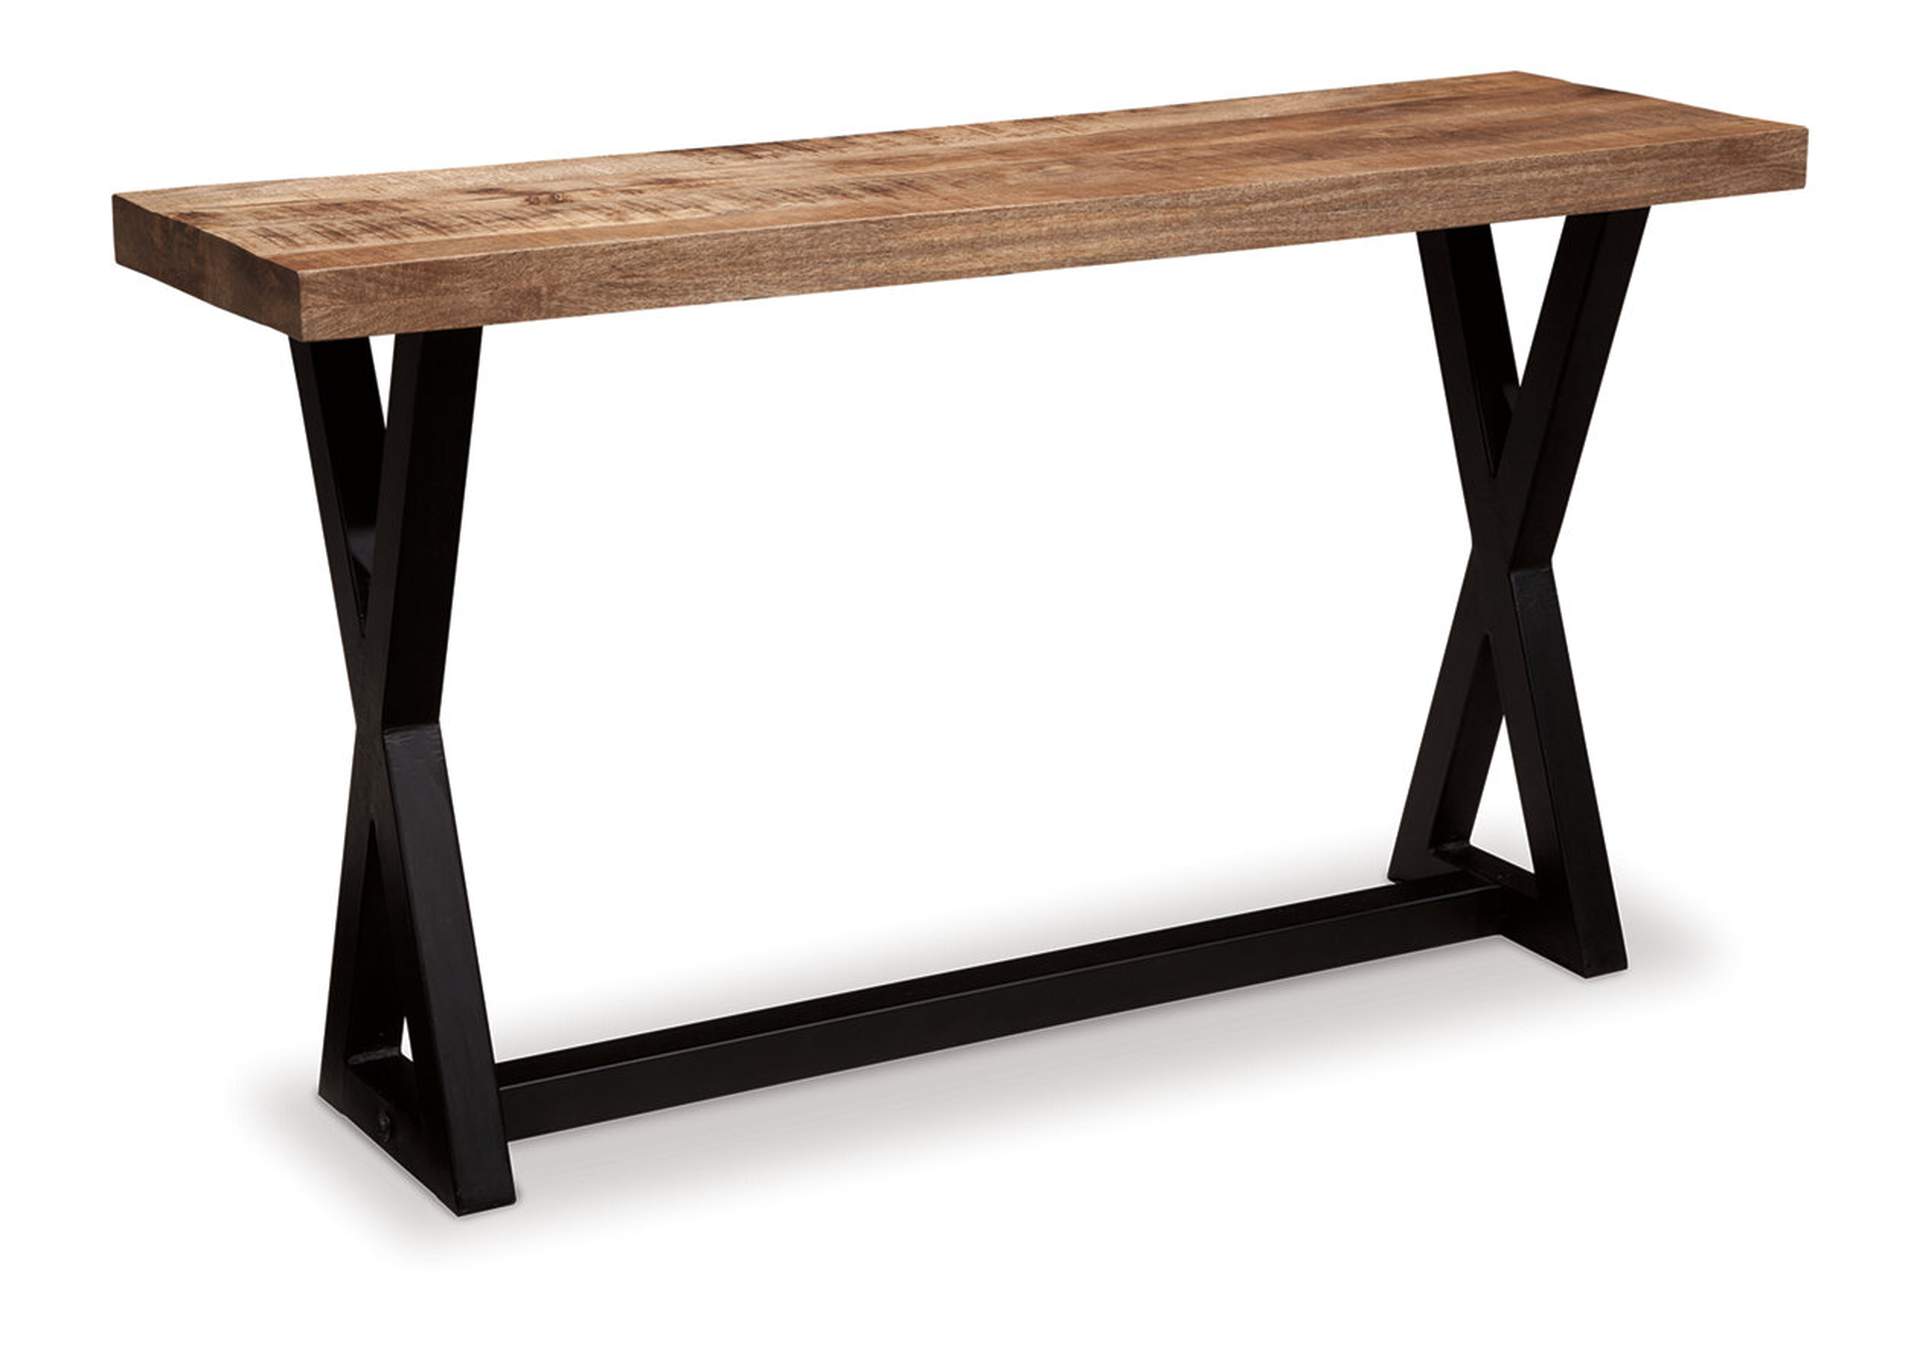 Wesling Brown Sofa Table,Direct To Consumer Express